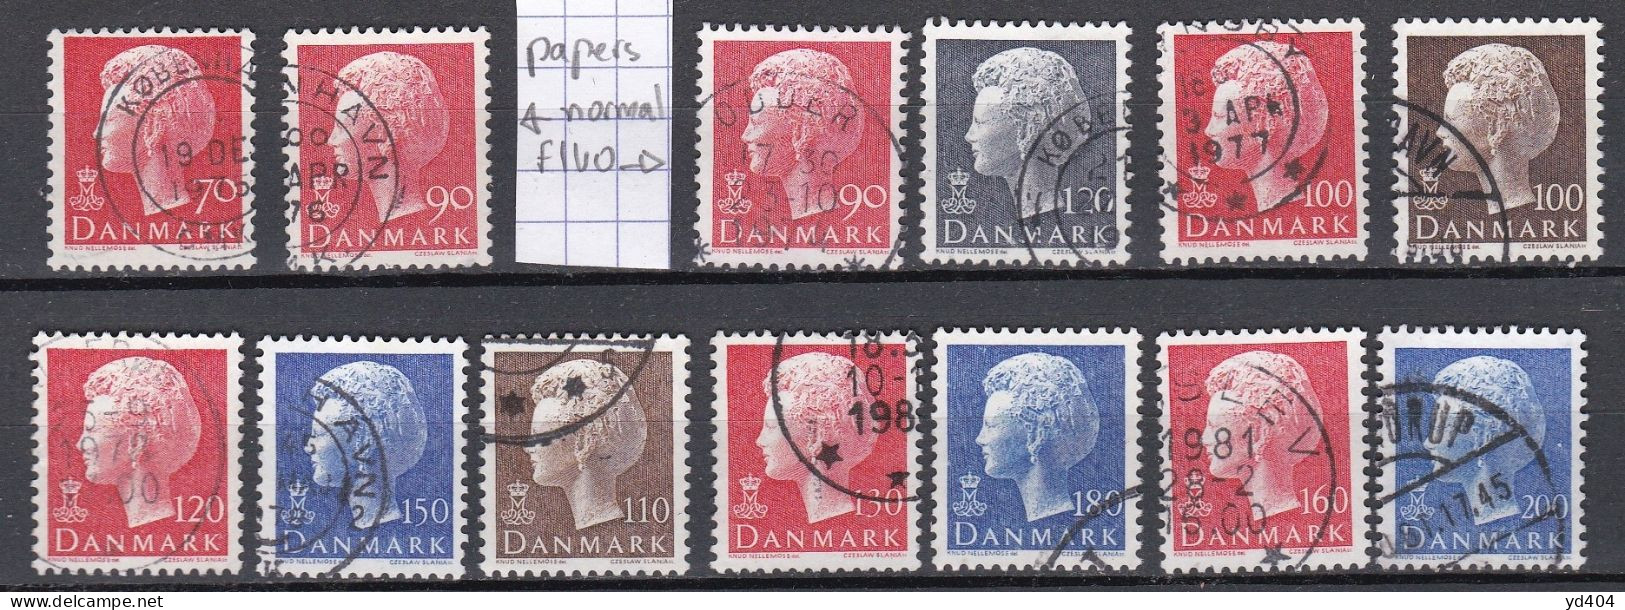 DK061 – DENMARK – 1974-80 – QUEEN MARGRETHE COLLECTION – MI # 558732 USED - Used Stamps